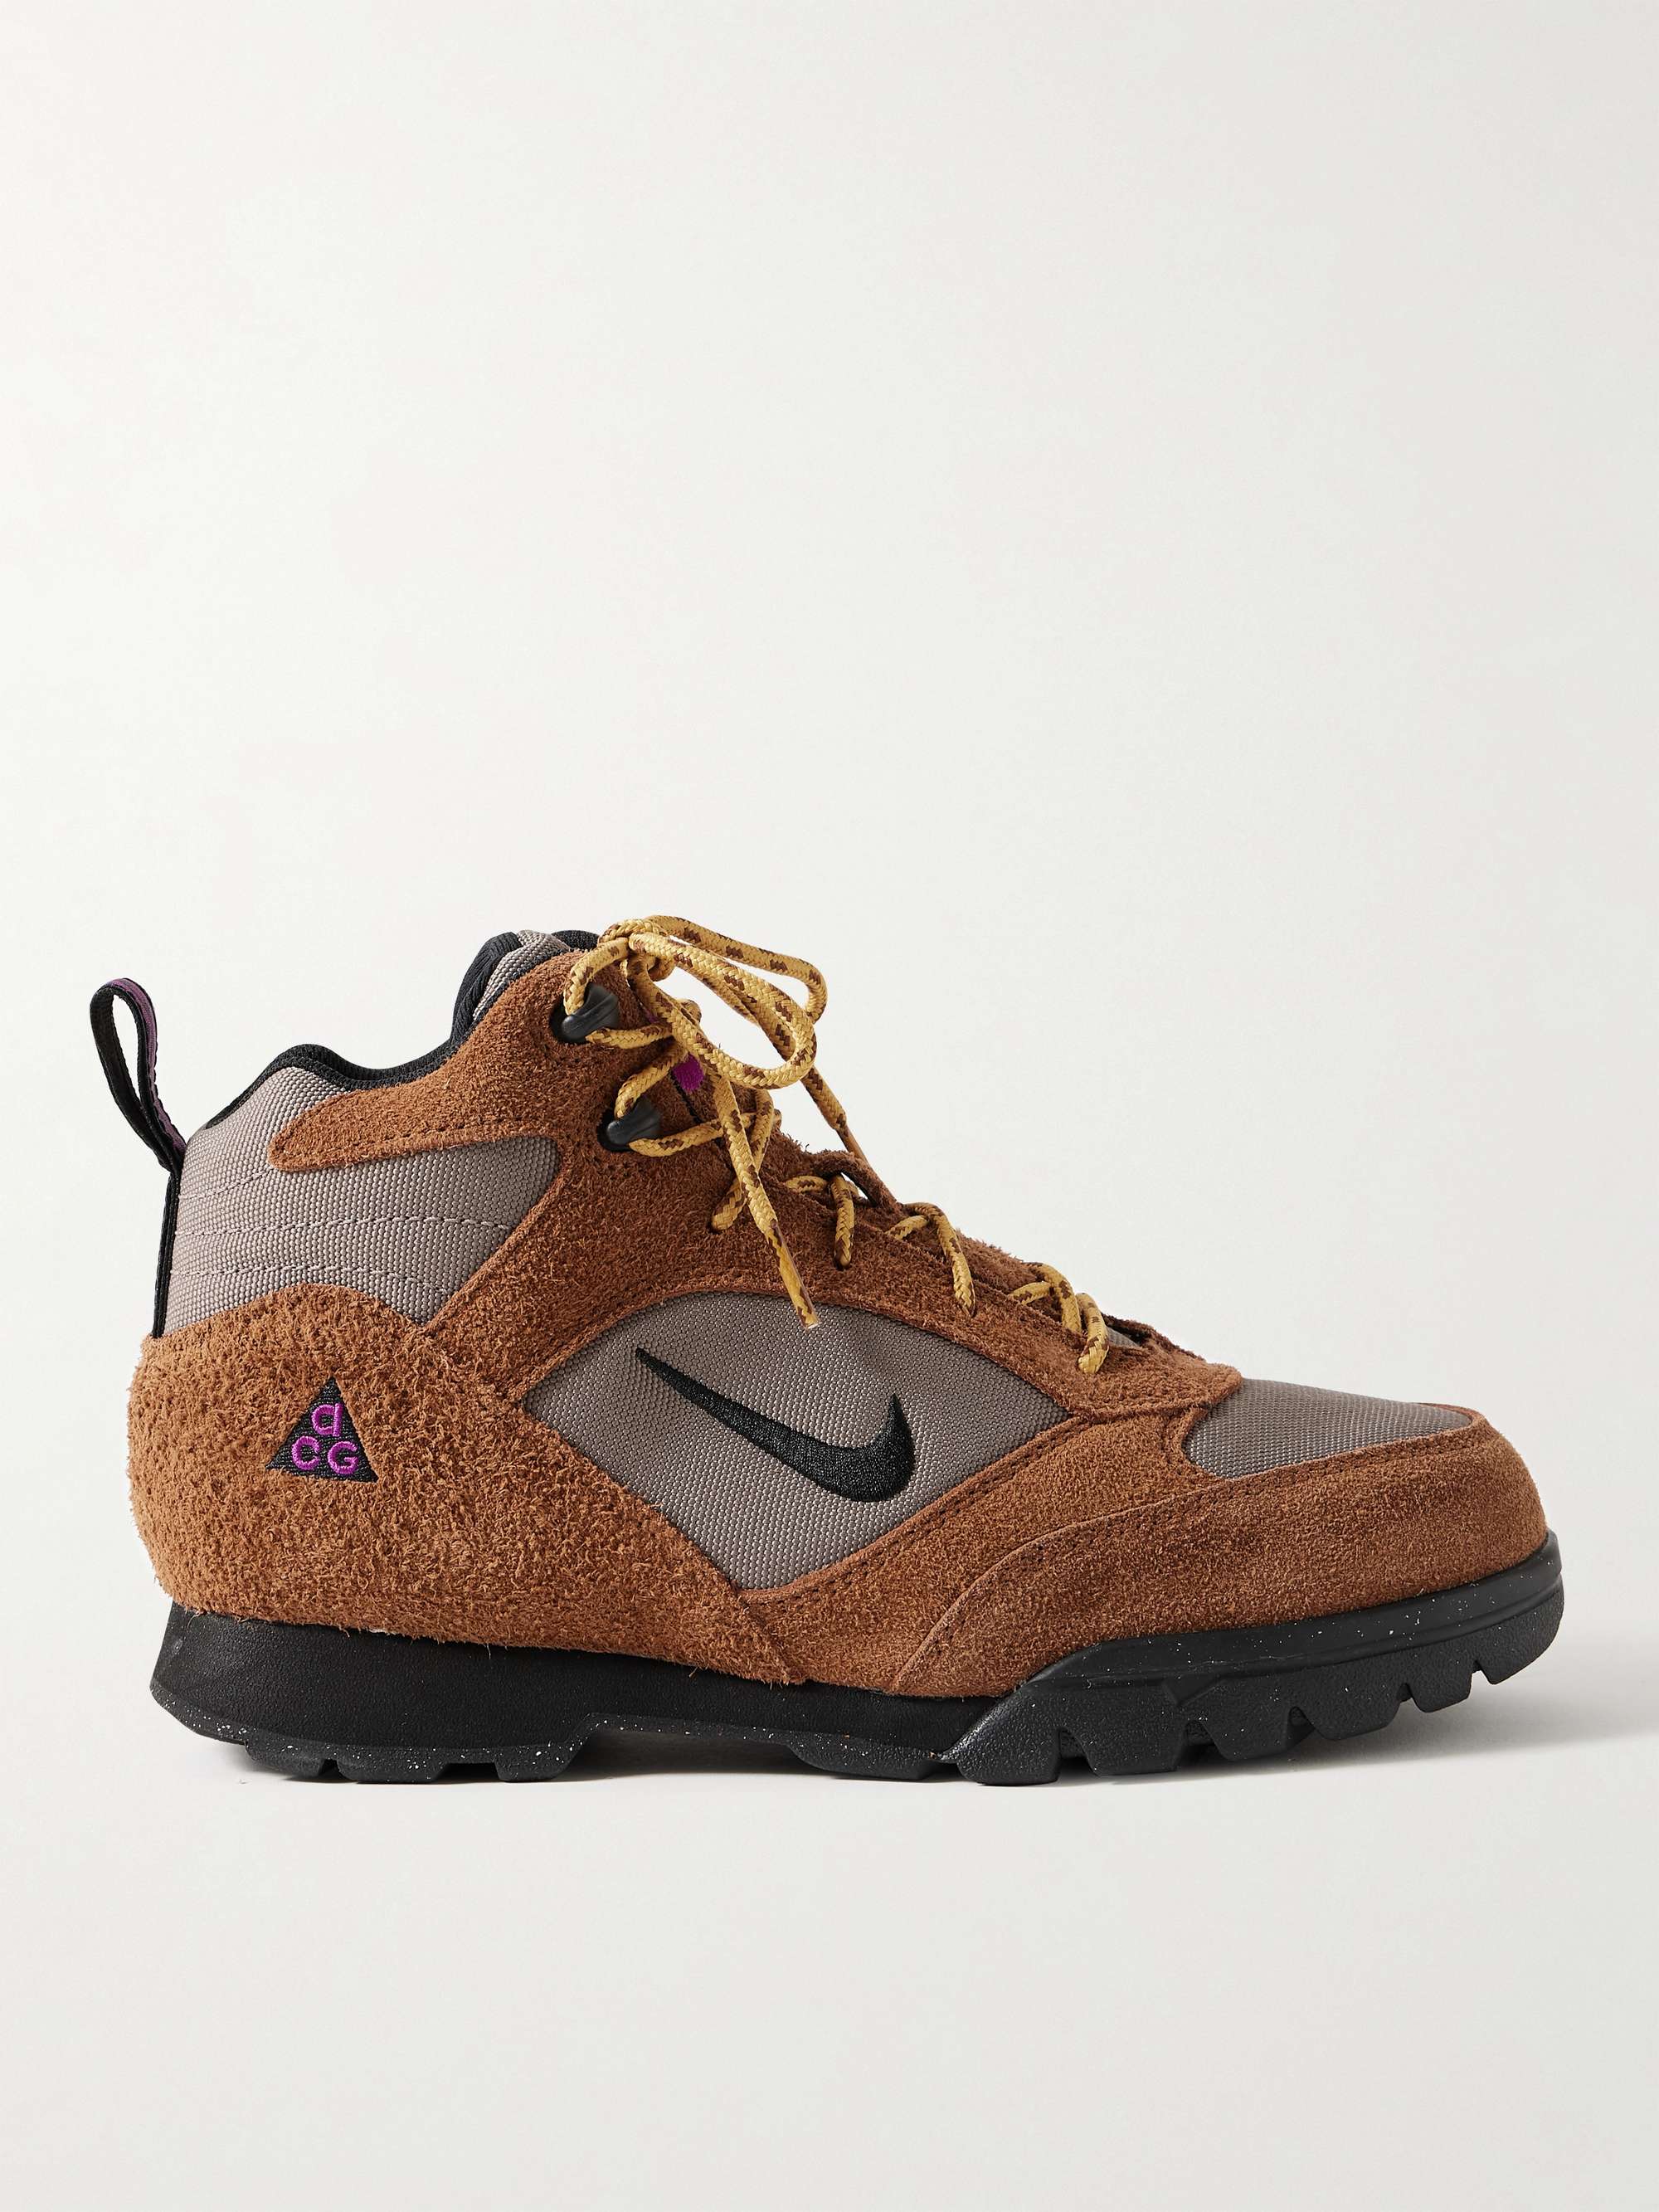 NIKE ACG Torre Mid Canvas and Suede Hiking Boots for Men | MR PORTER